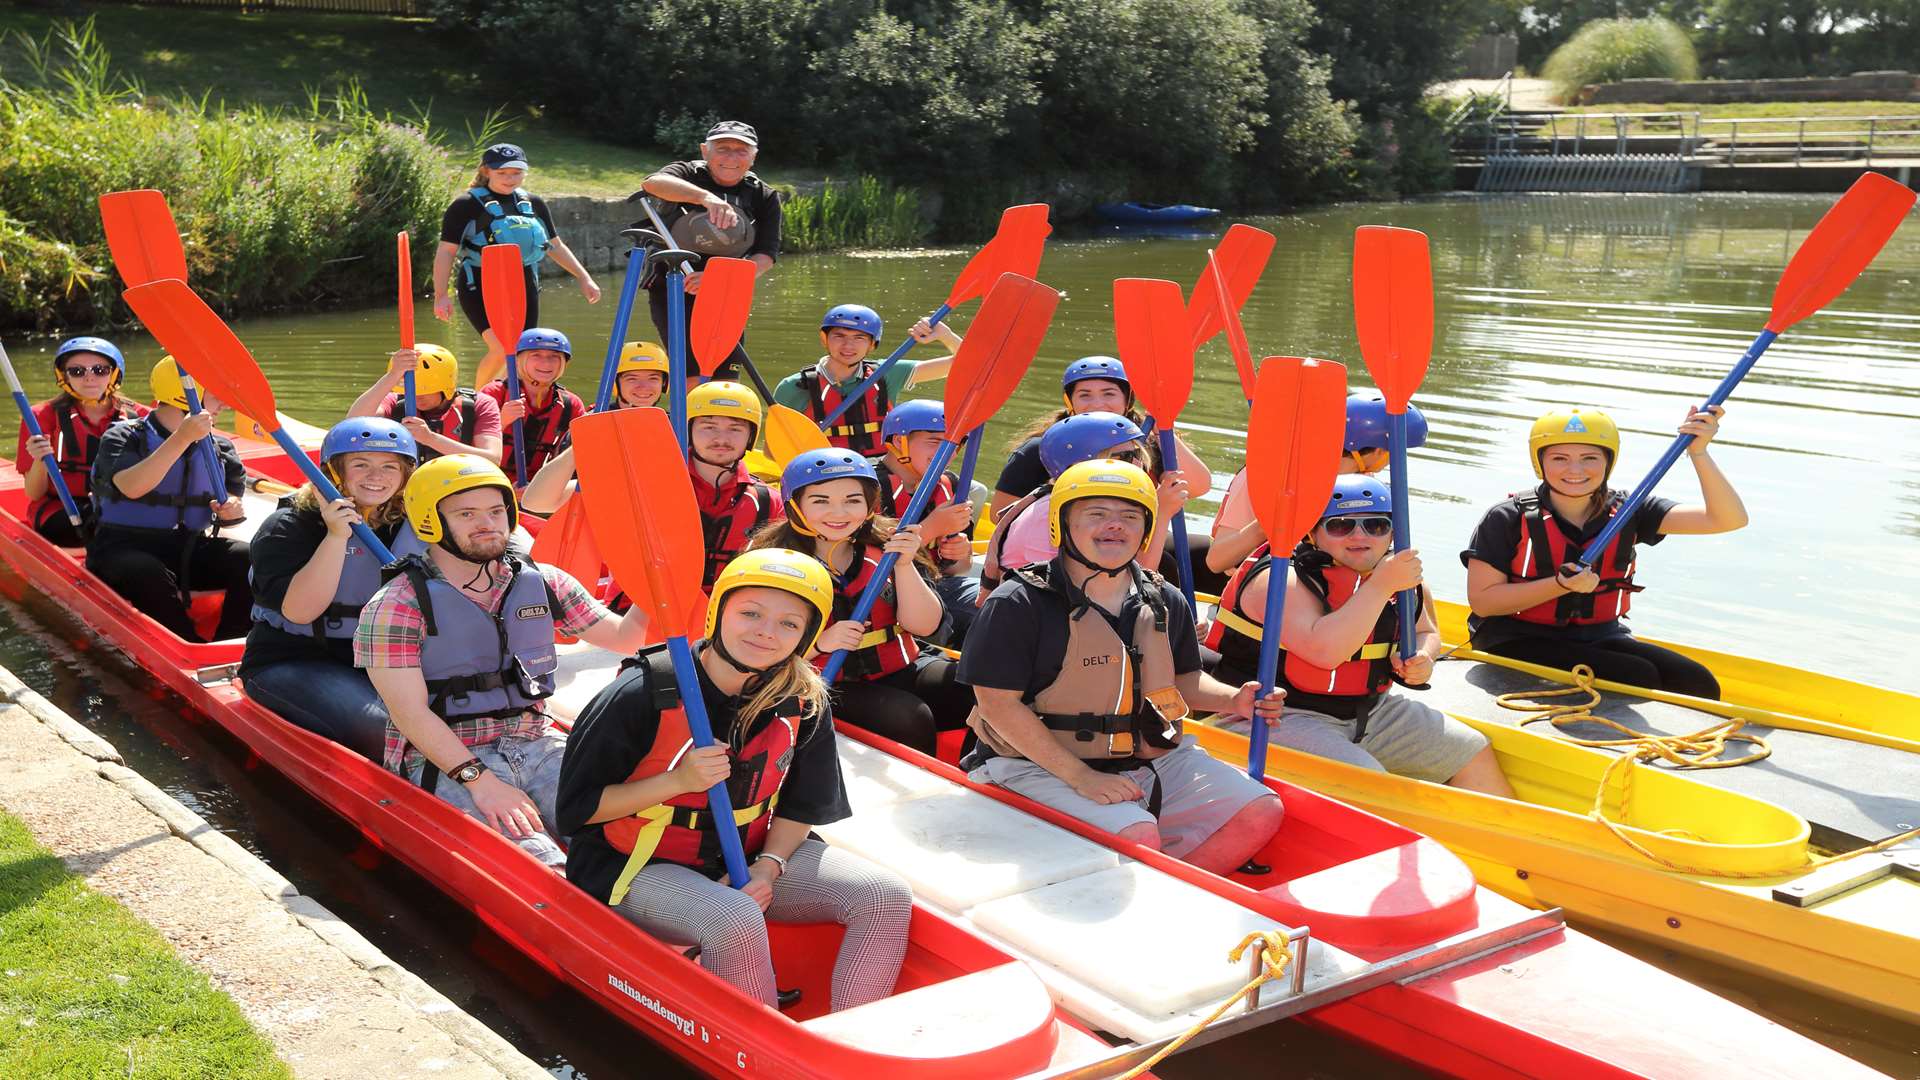 The children canoeing at Hythe. They take part in a different activity each day for three weeks.